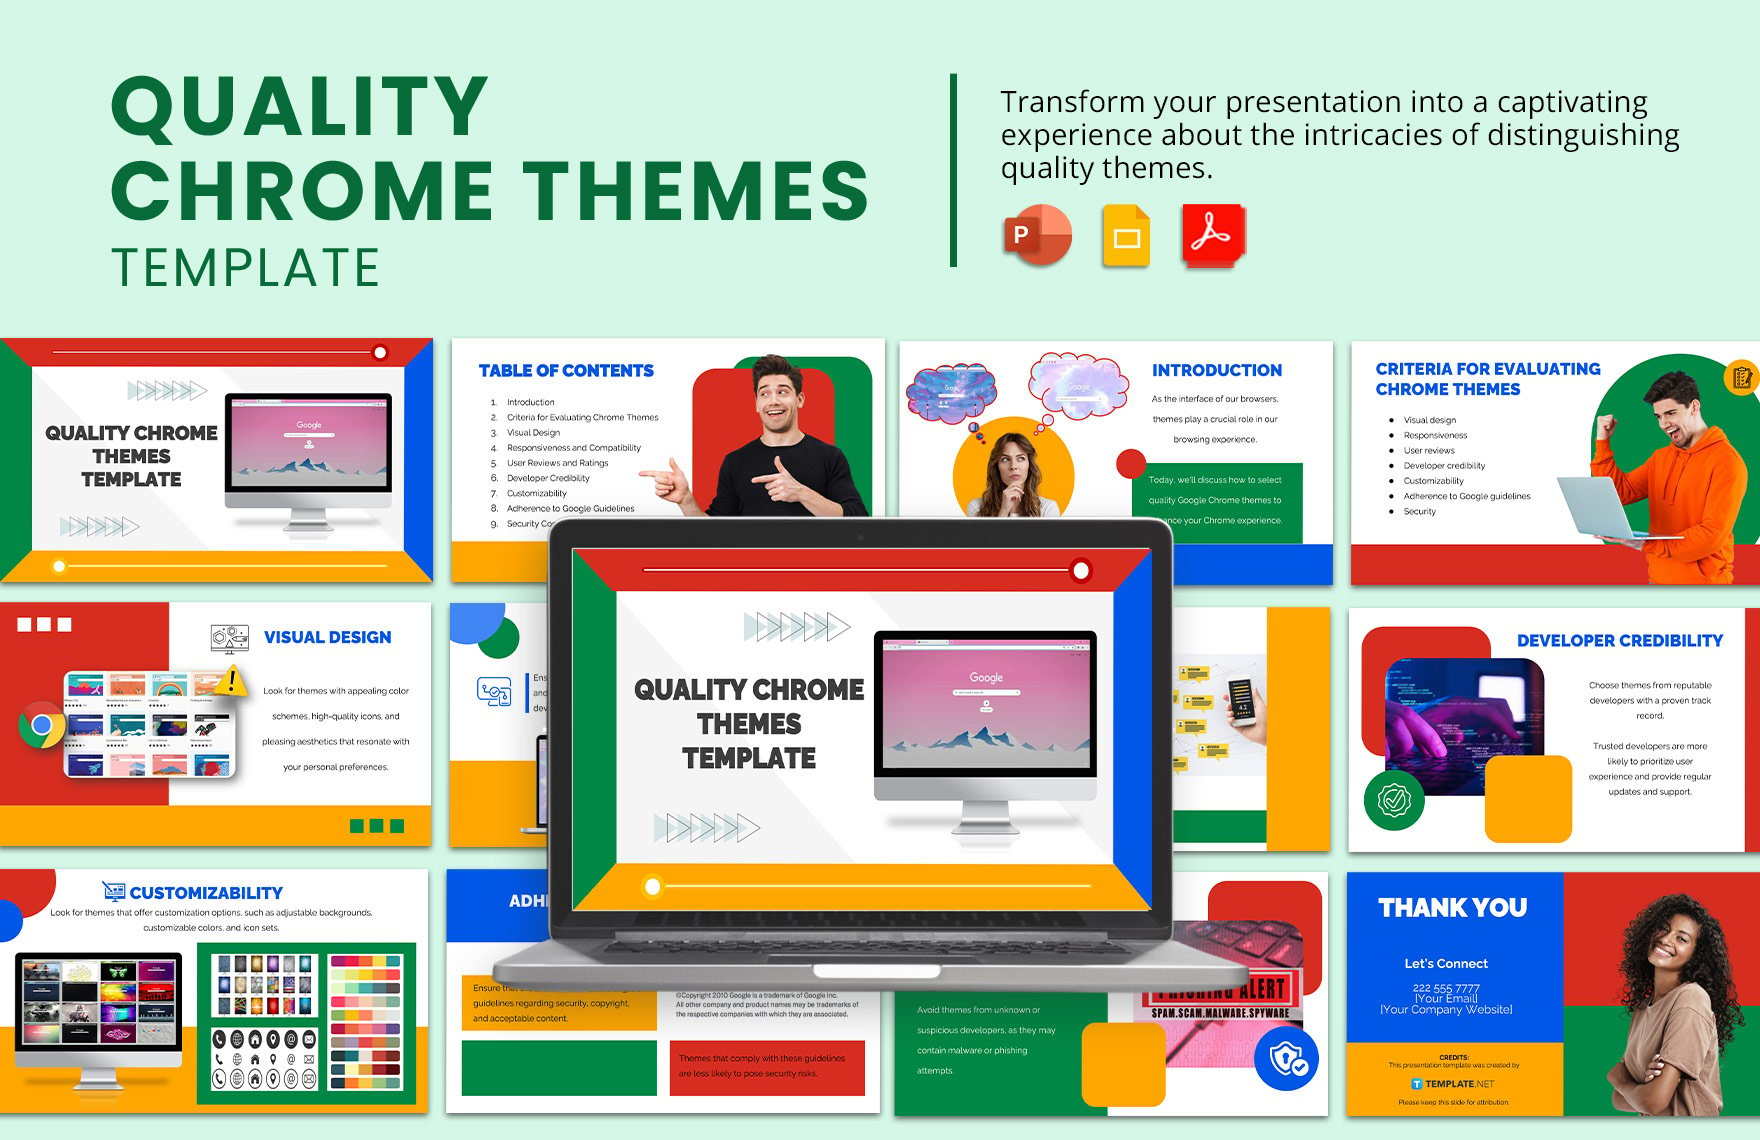 Quality Chrome Themes Template in PDF, PowerPoint, Google Slides